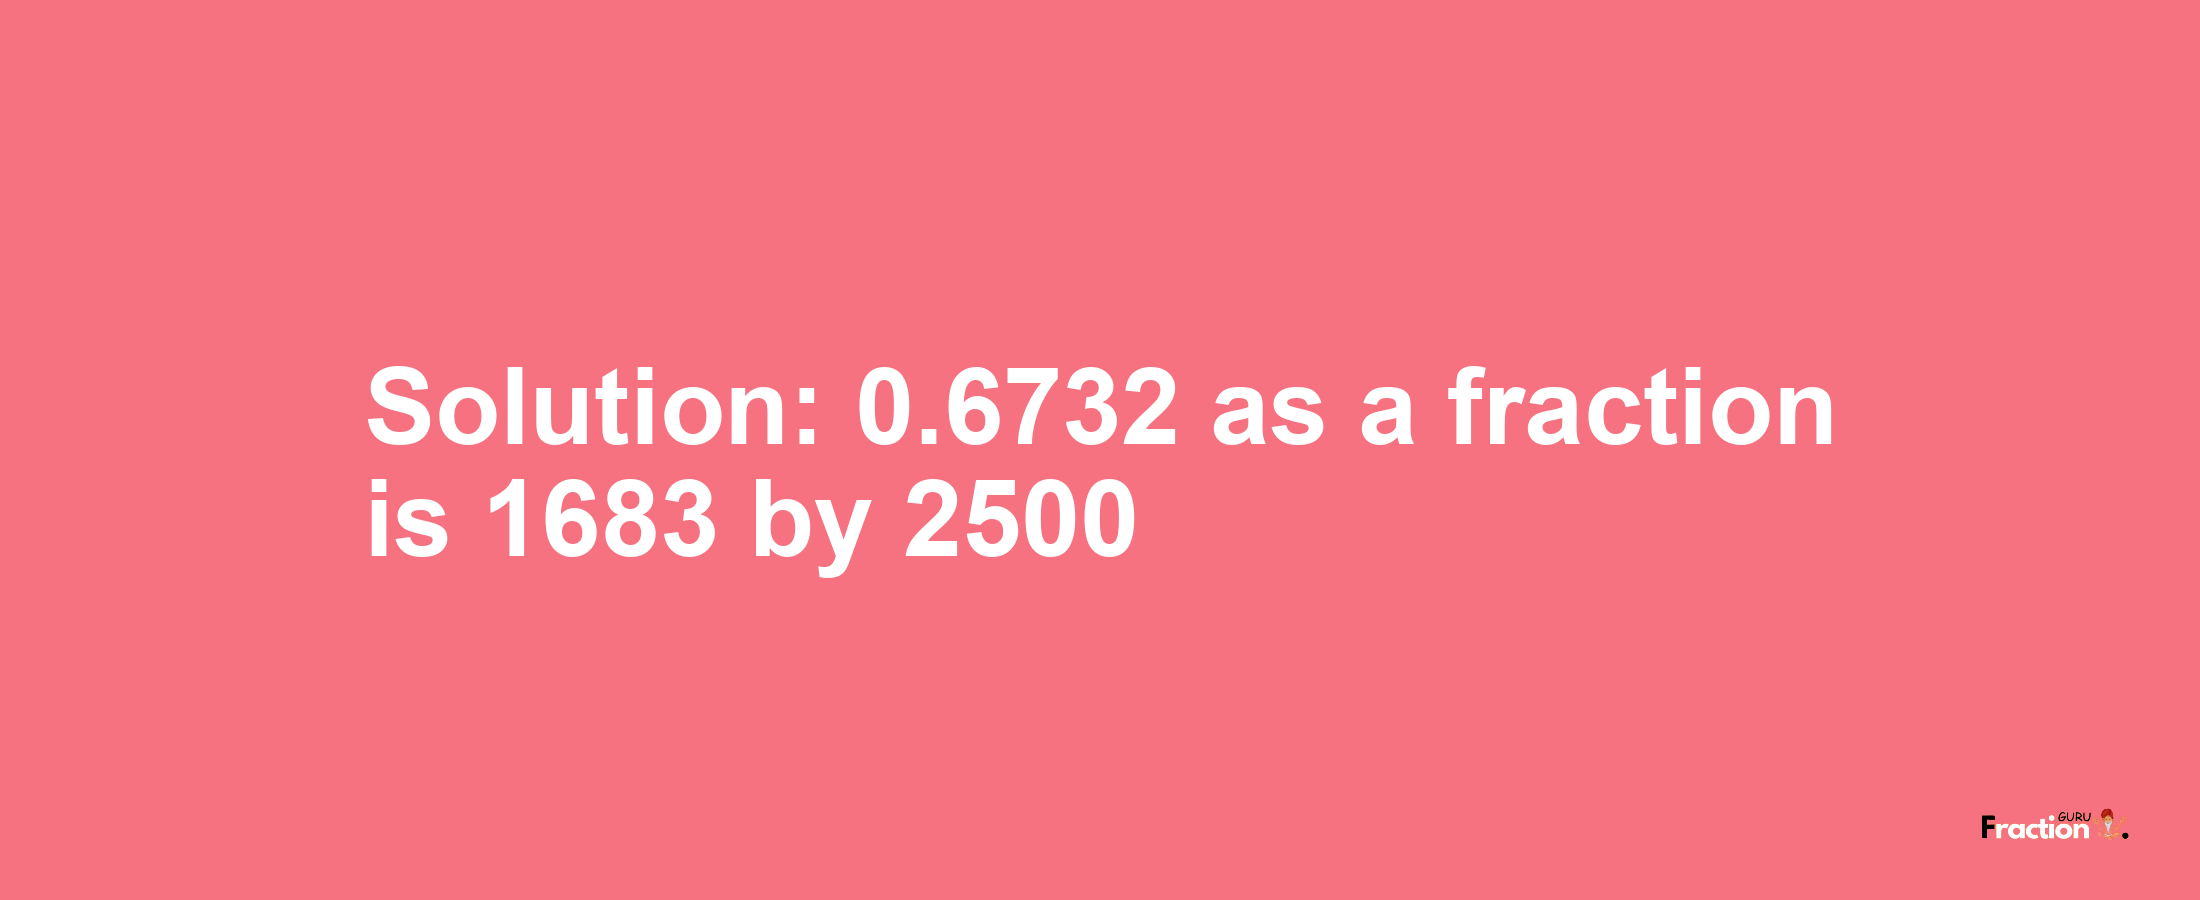 Solution:0.6732 as a fraction is 1683/2500